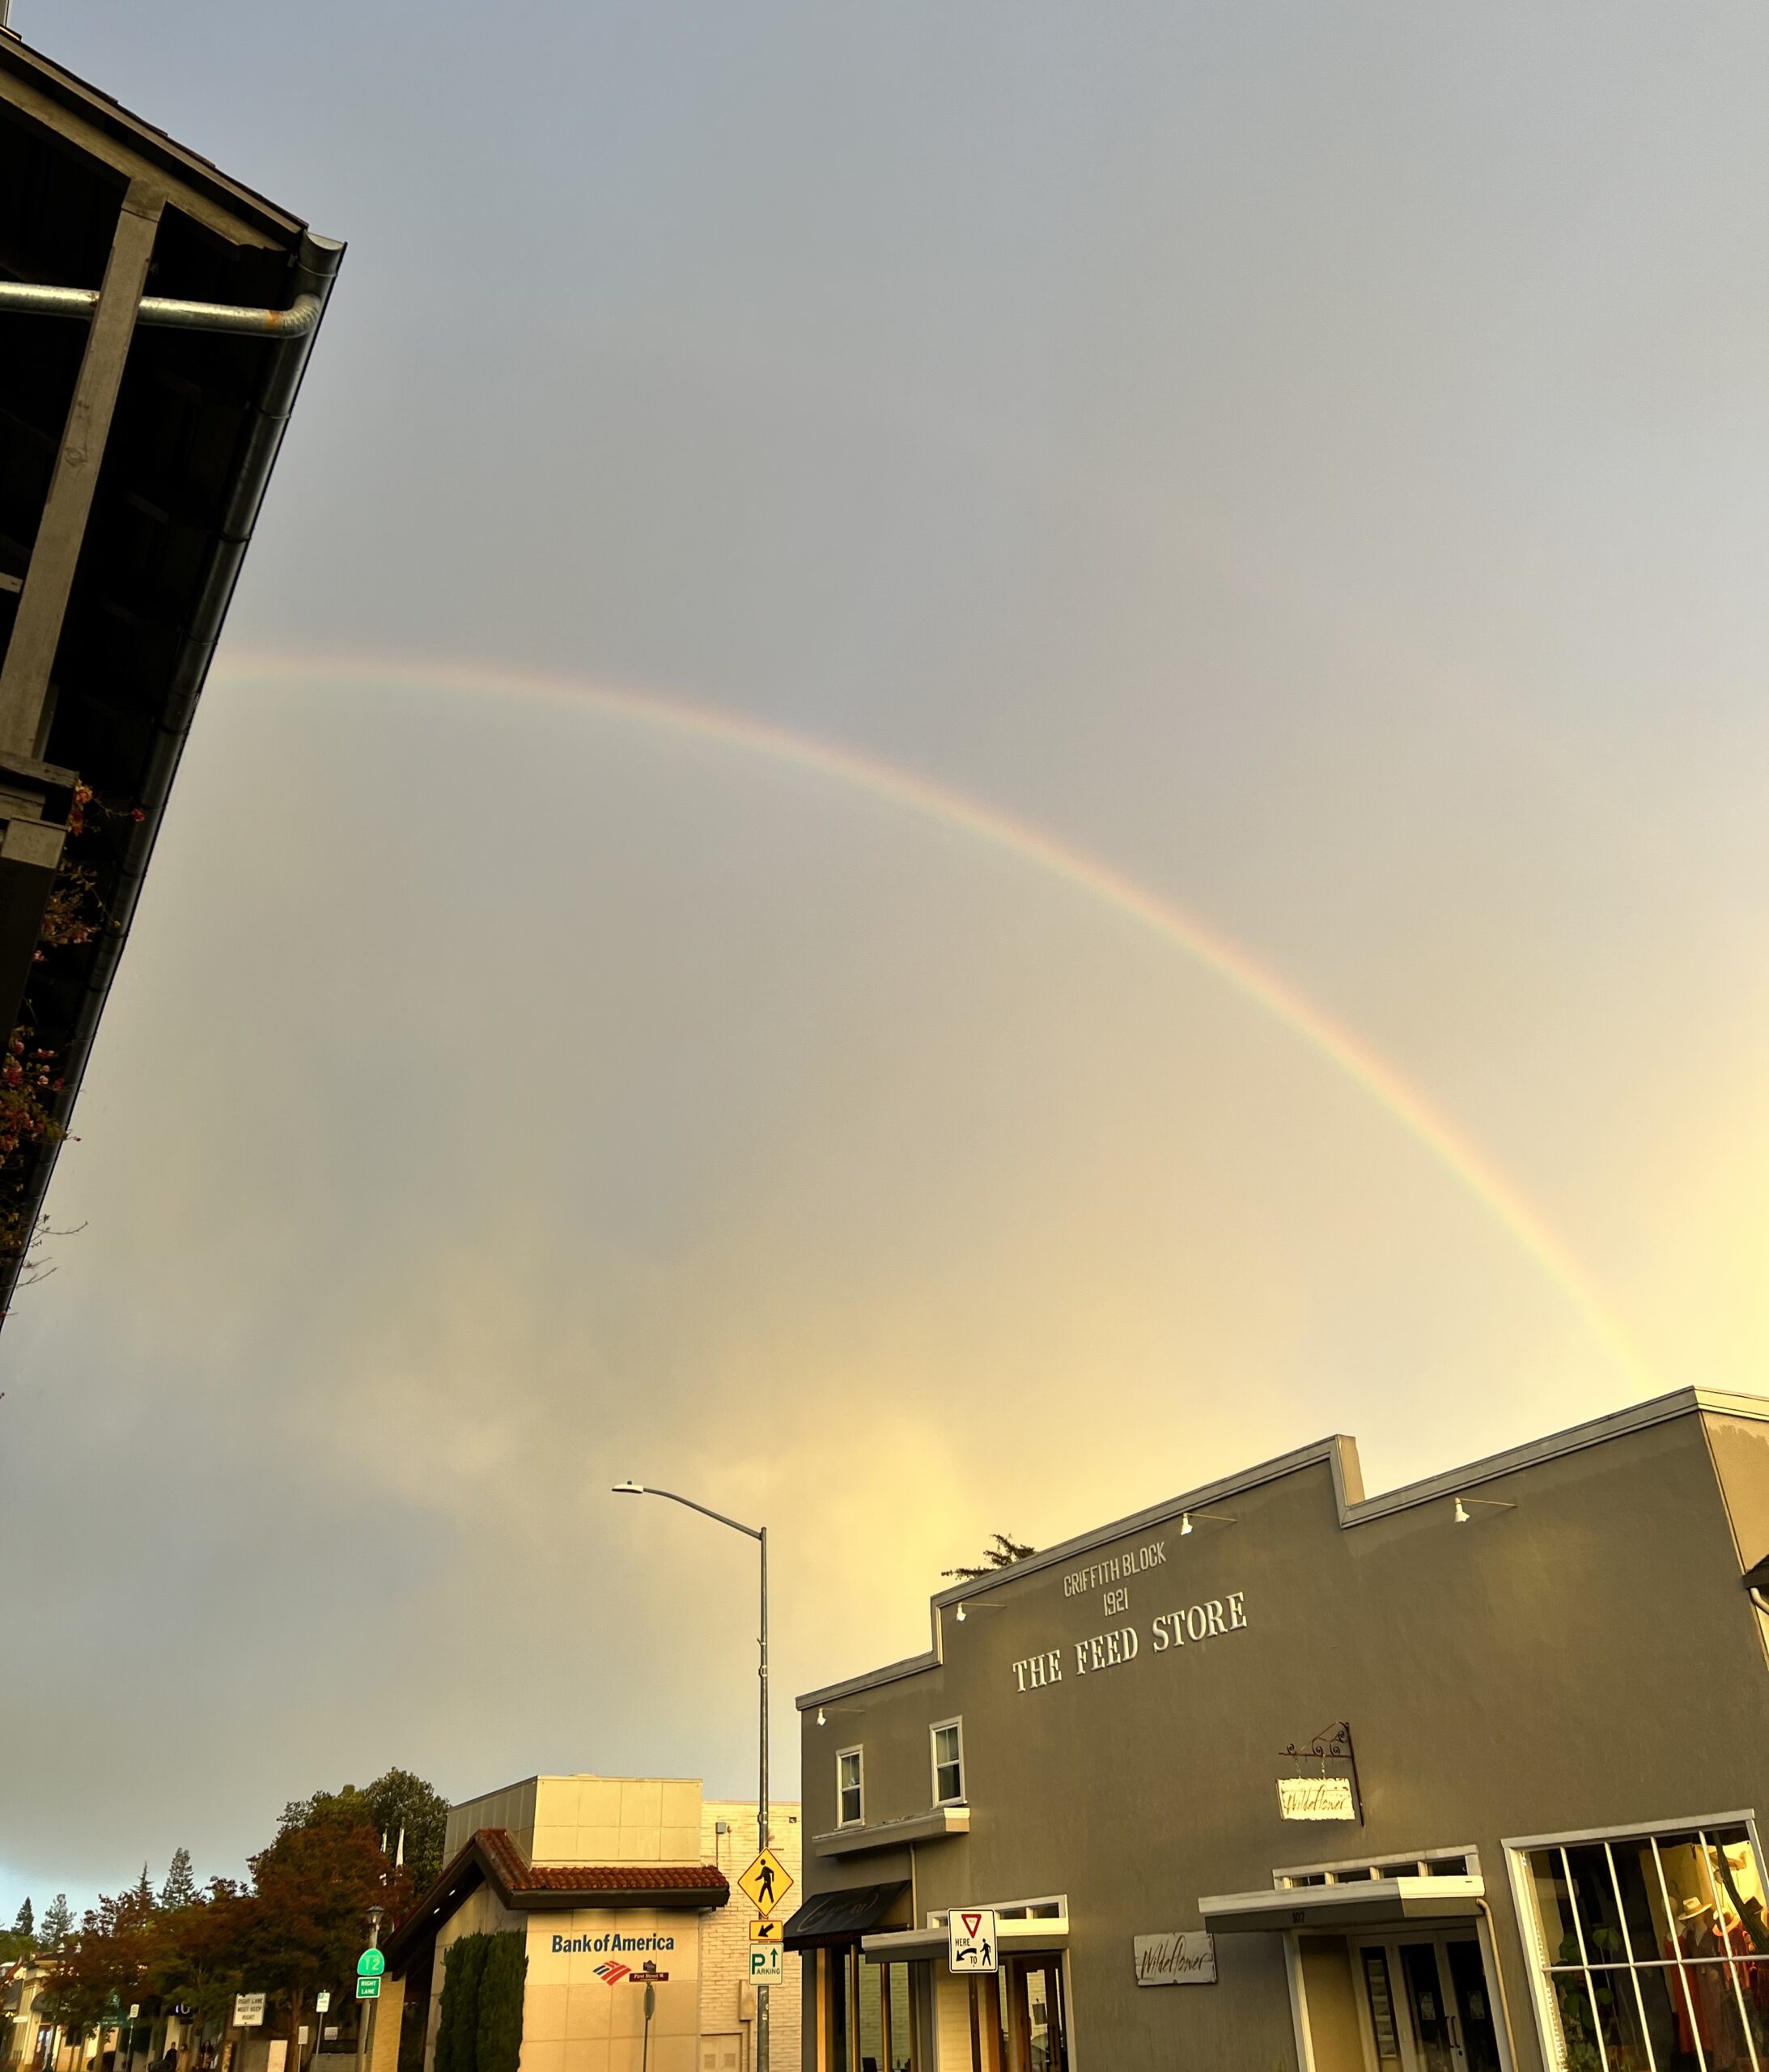 A double rainbow above two buildings against a blue and grey sky.